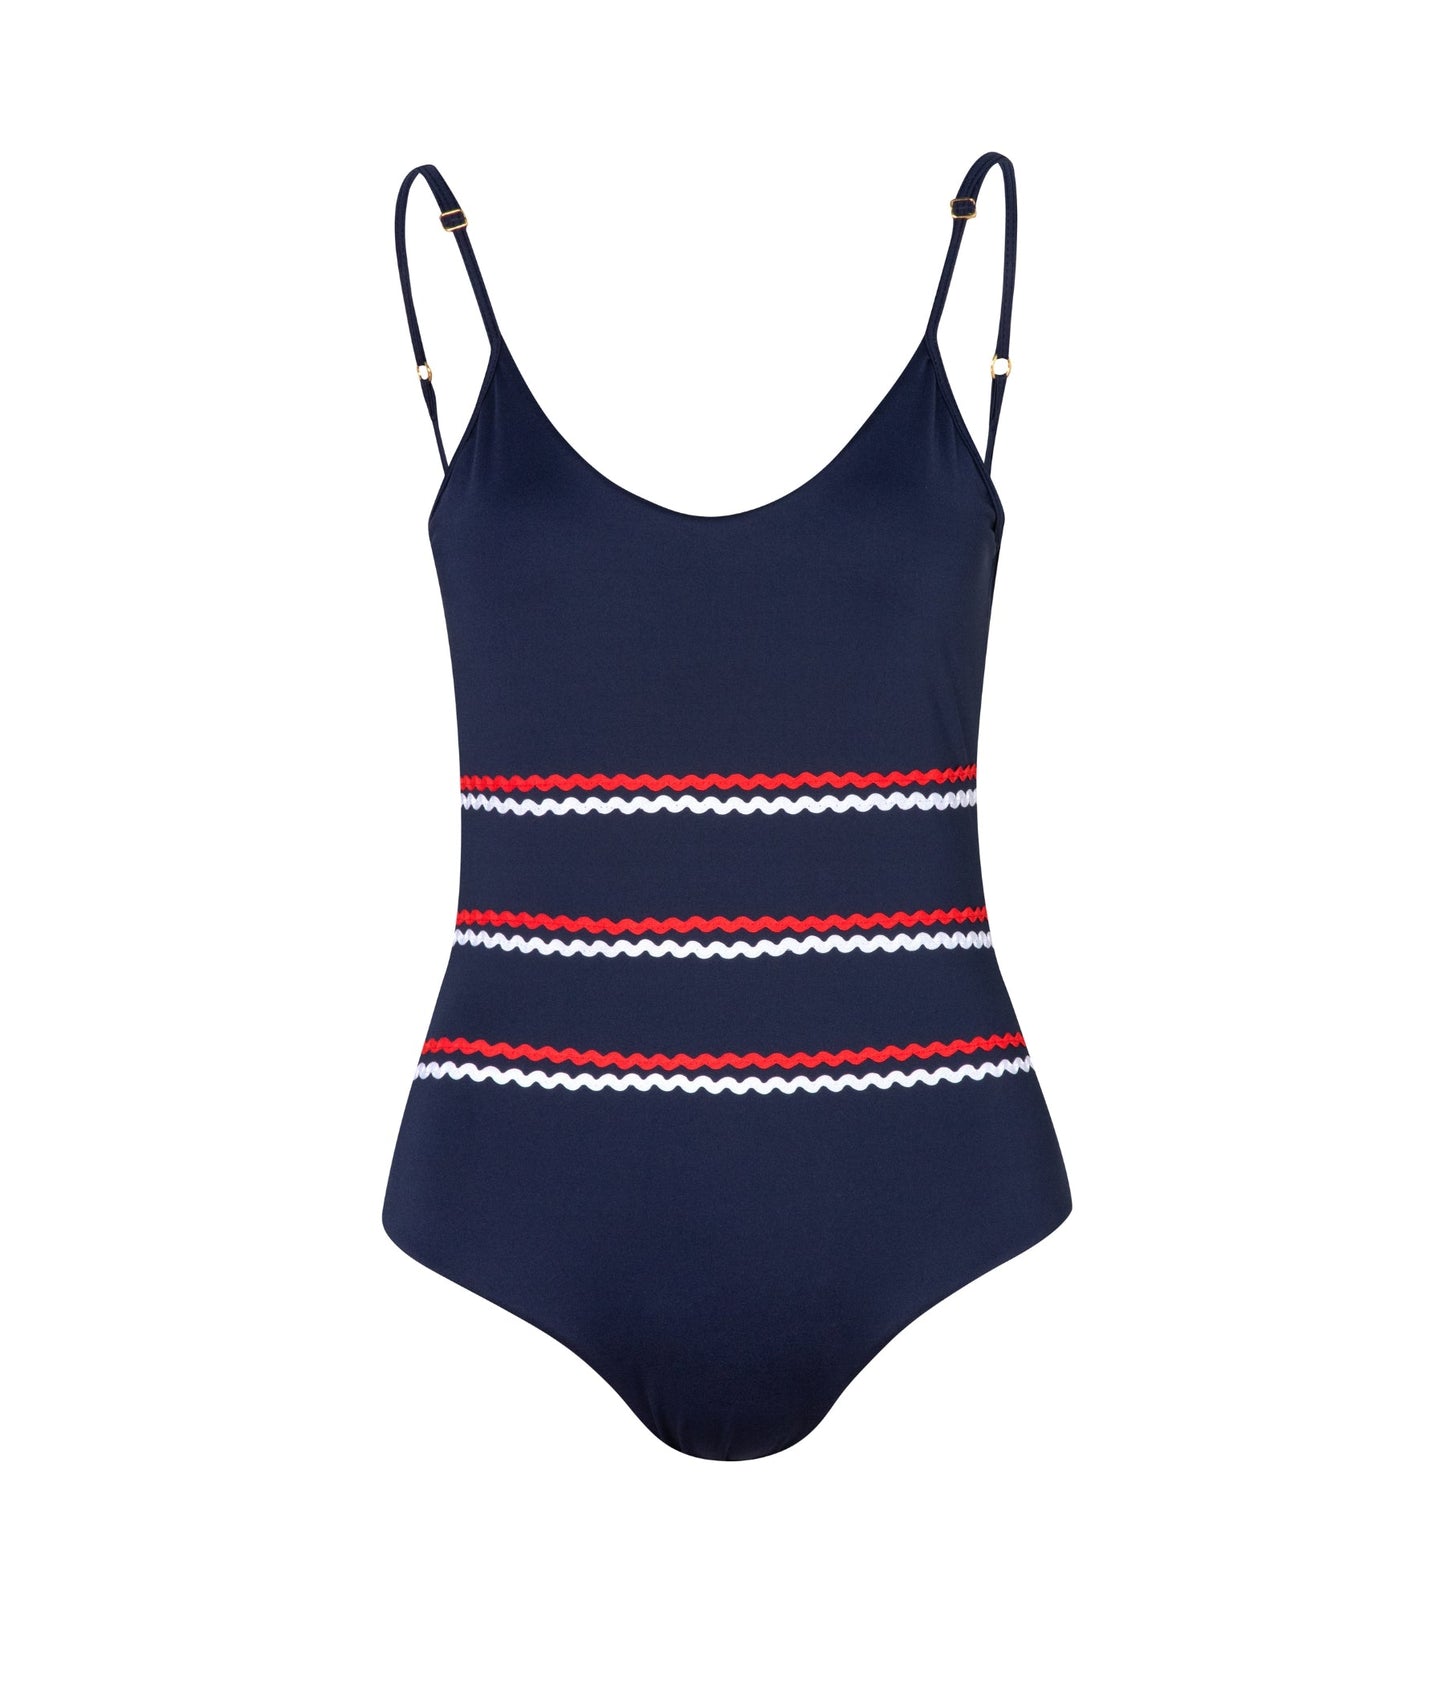 Verdelimon - One Piece - Tulum - Les Coquettes - Navy French Waves - Front